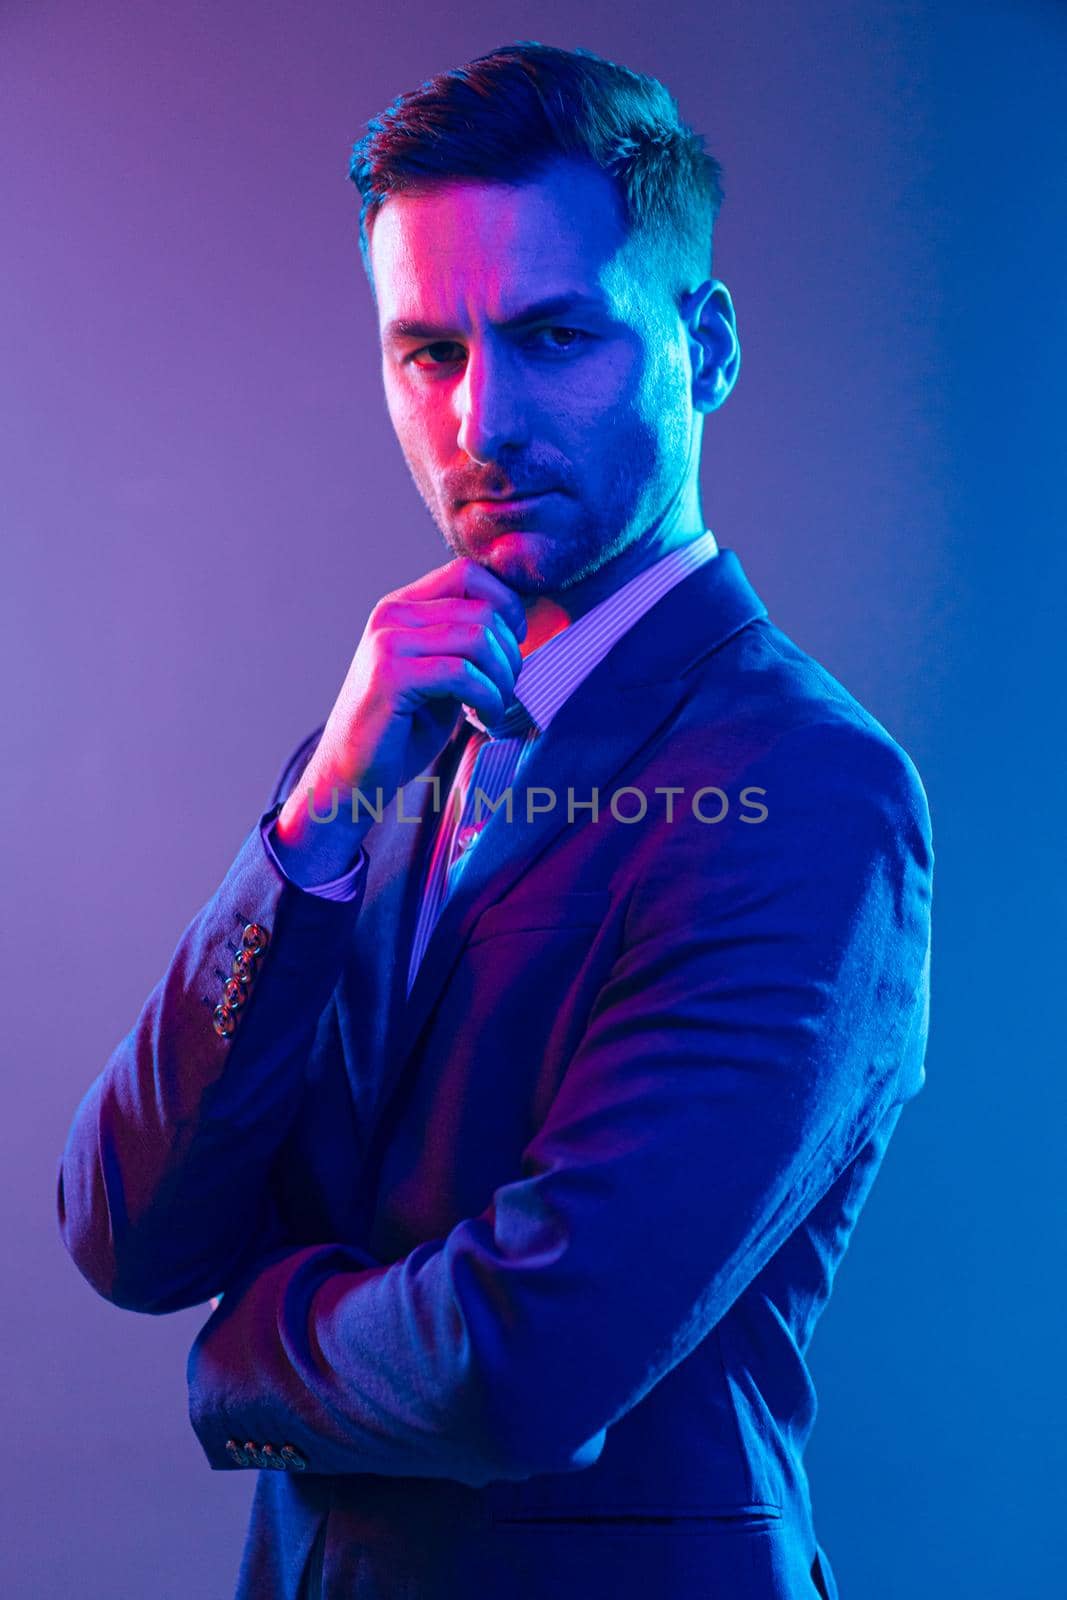 Expensive Lawyer Before a Court Hearing, The Chief Decision Maker for the Business. The Portrait of a White Man Posing in Studio With Multicolored Neon Light on a Gray Background. High quality photo